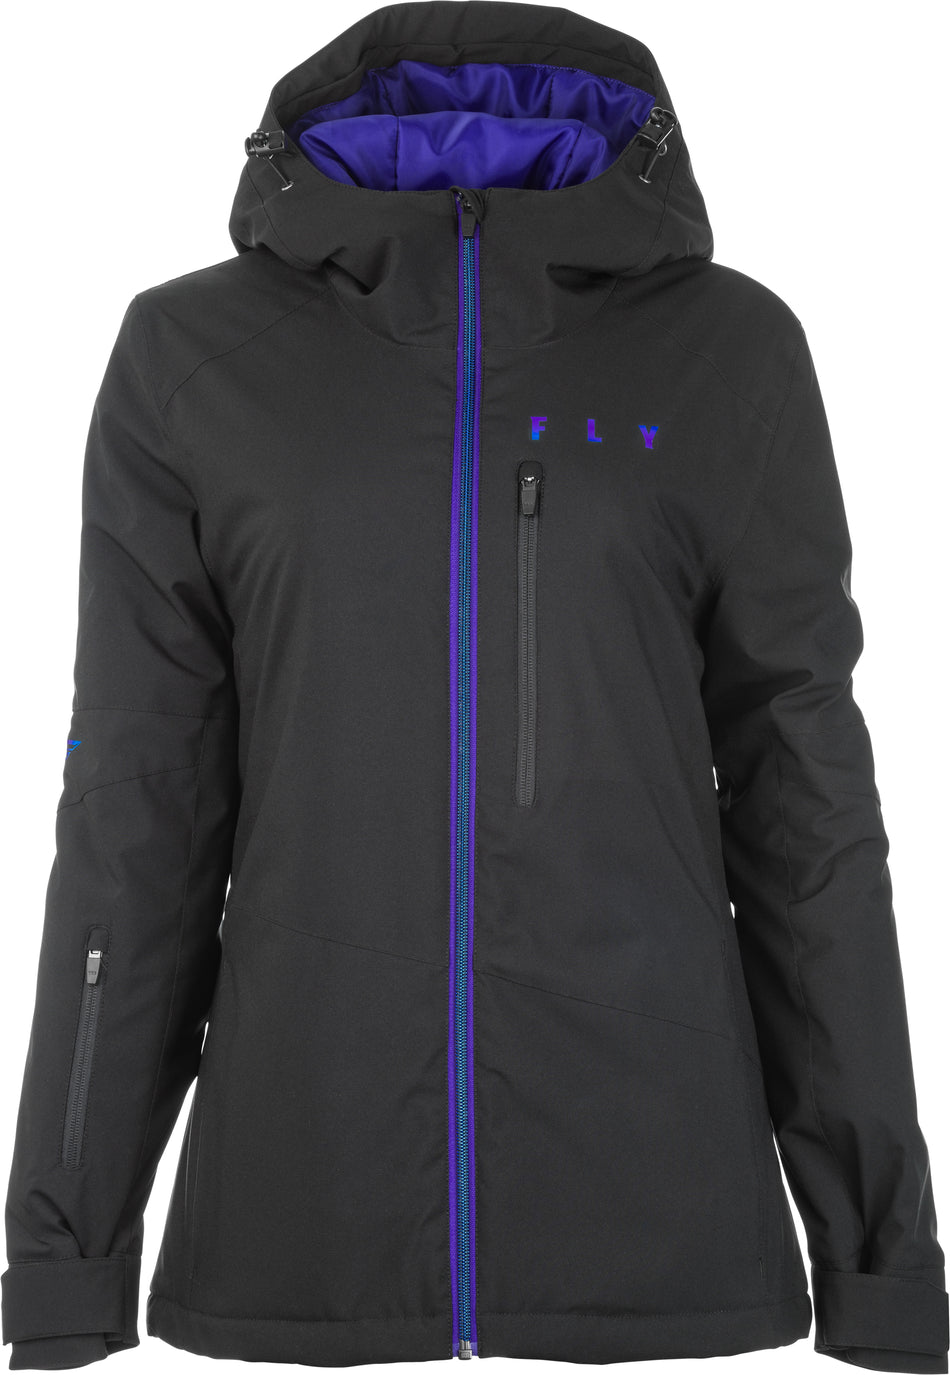 FLY RACING Women's Fly Haley Jacket Black Md 358-5201M